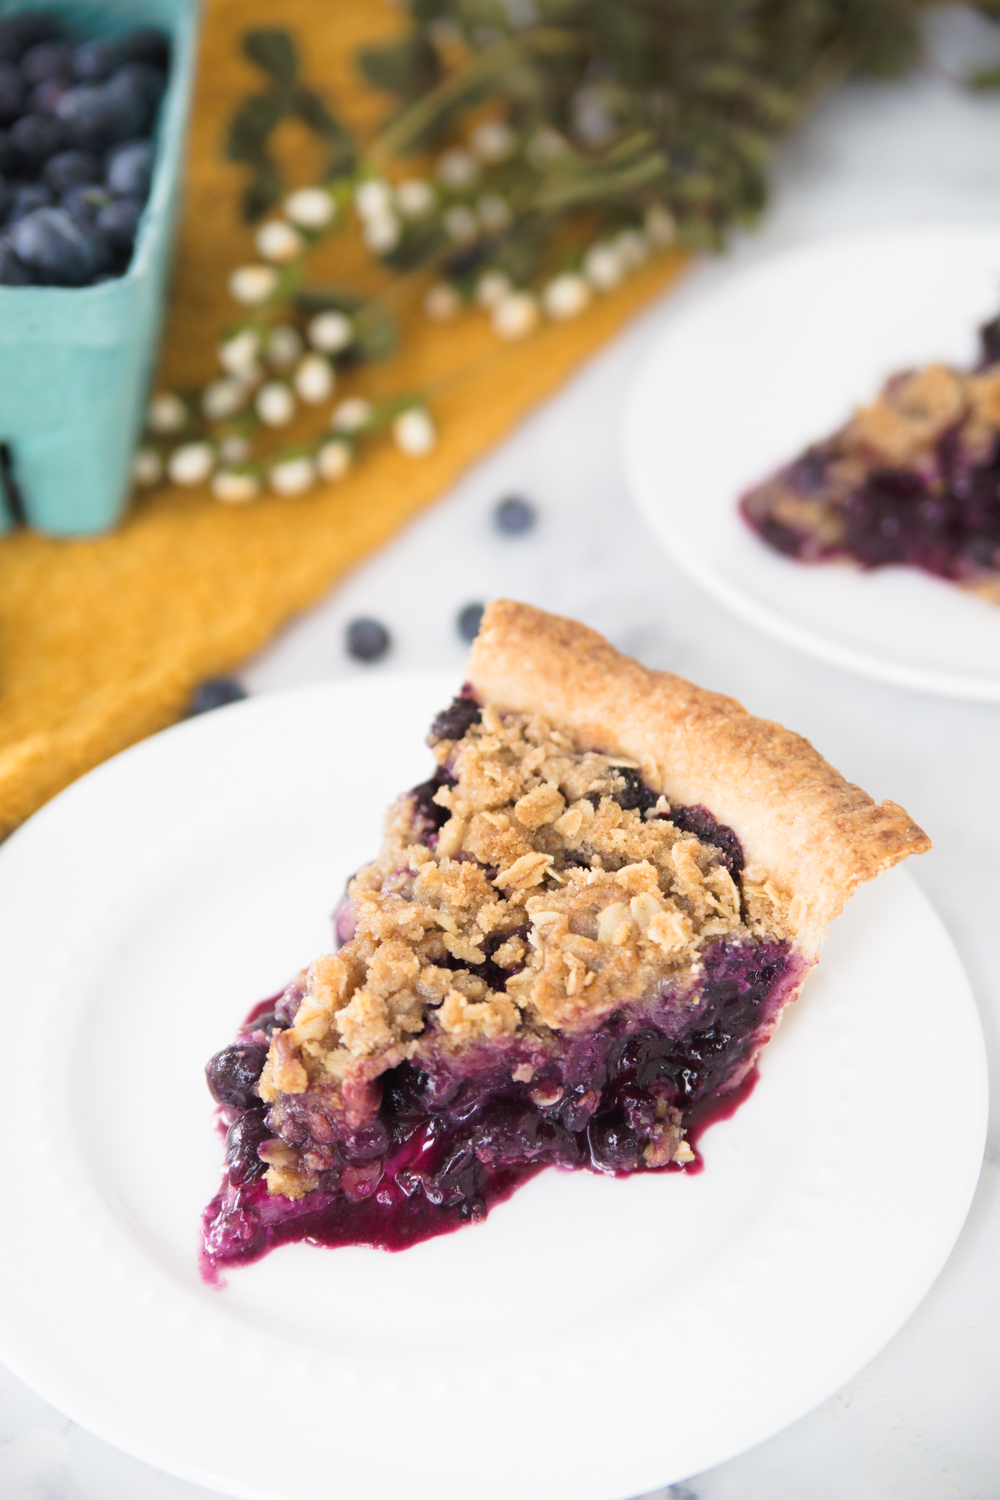 This Blueberry Crumb Pie is bursting with a sweet berry filling and topped with a crunchy crumb crust.  It's the perfect amount of crunch with the juicy berries.